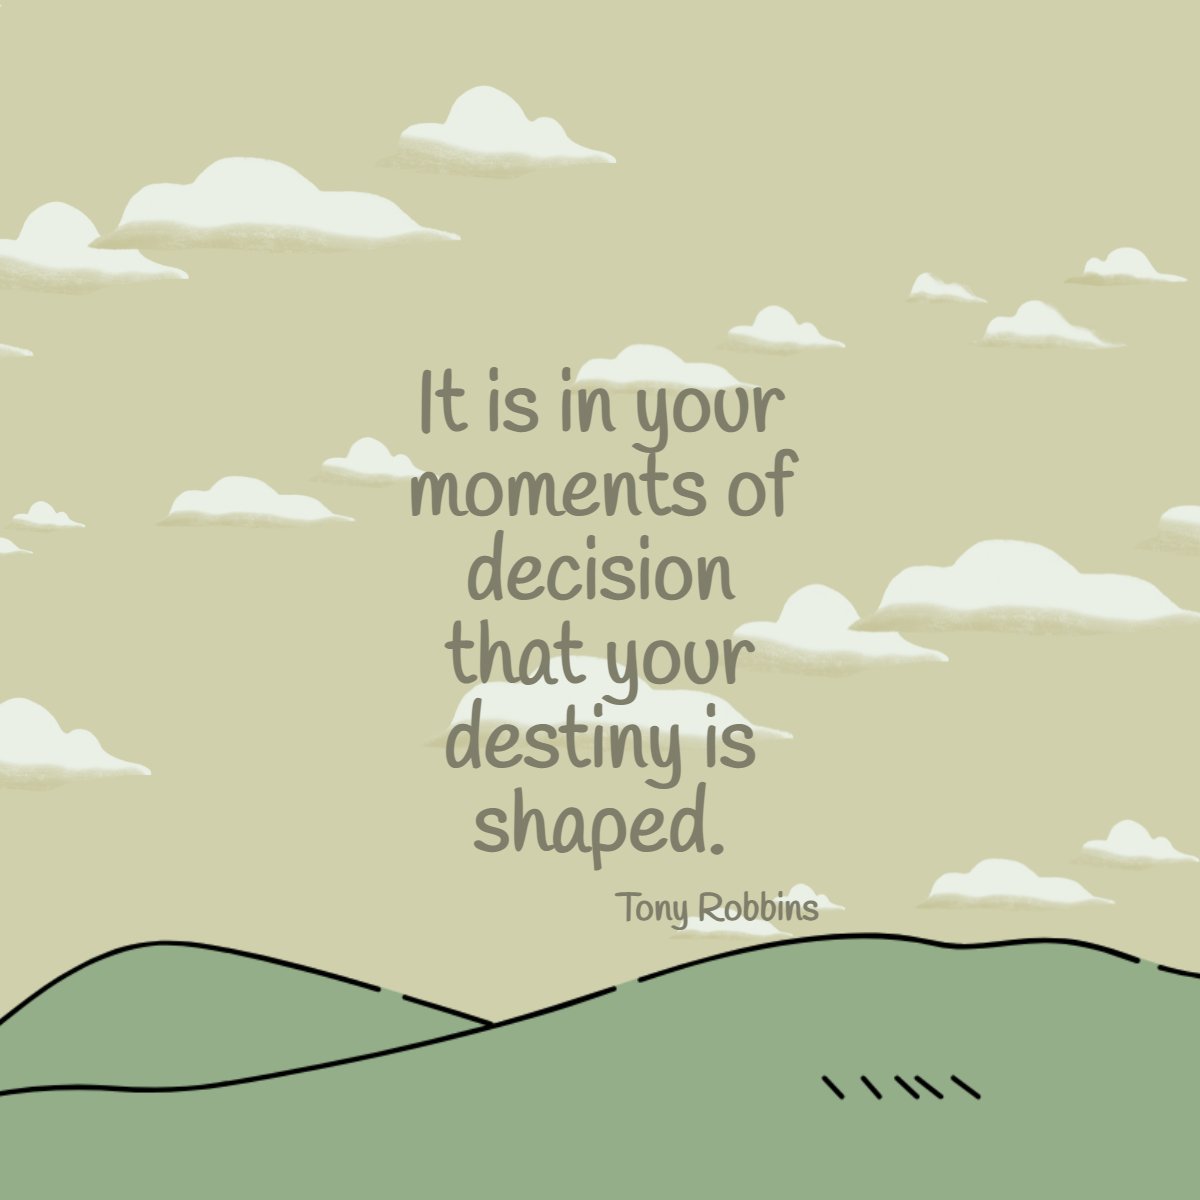 'It is in your moments of decision that your destiny is shaped.'
― Tony Robbins

 #instaquote #wisdom #quoteoftheday
 #LPTRealty #lptfam #lpttexas #htownrealestate #ctxrealestate #ctxguy #guycourtney